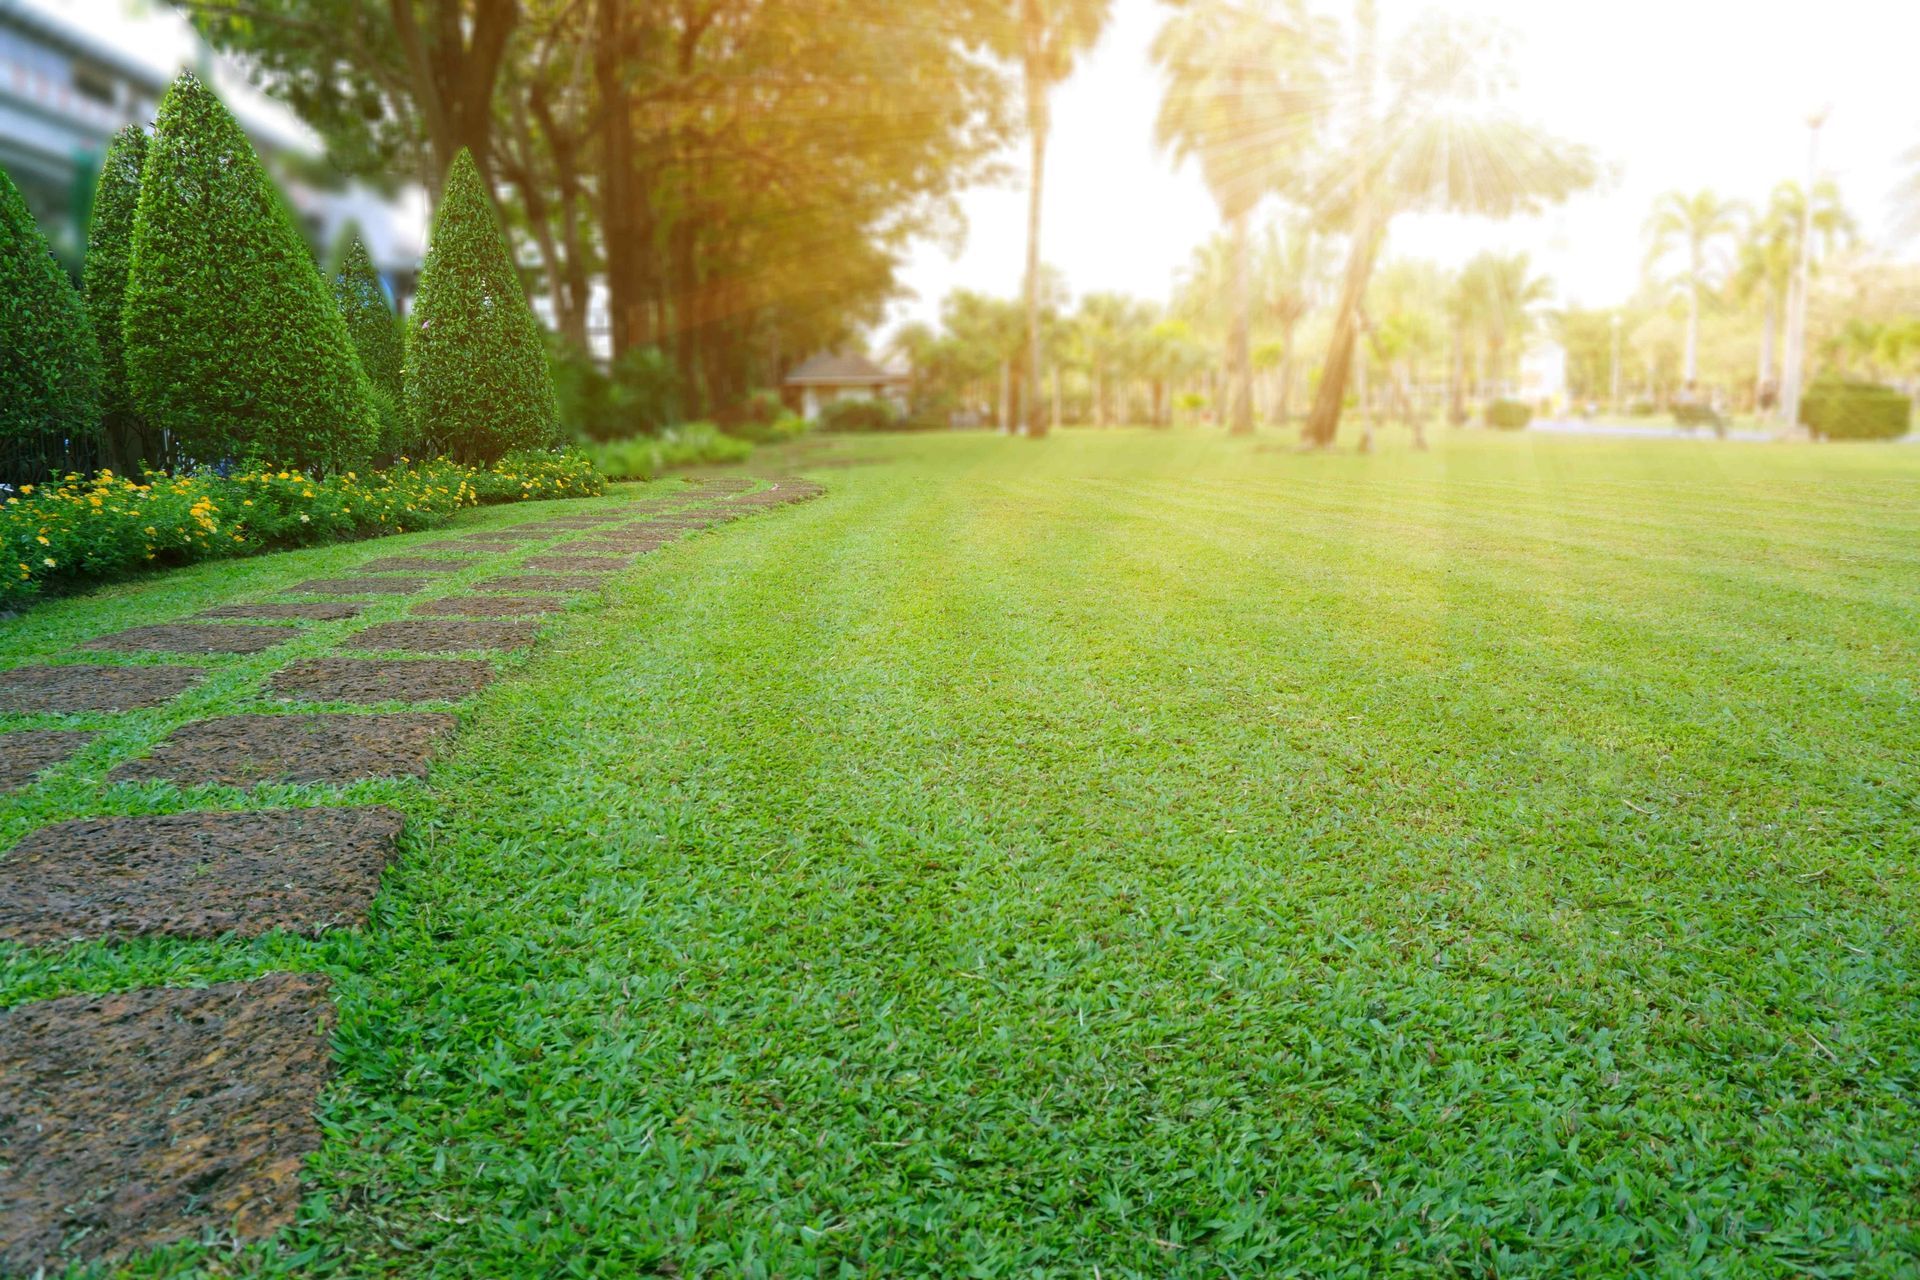 Gorgeous expanse of lawn, meticulously trimmed and maintained.